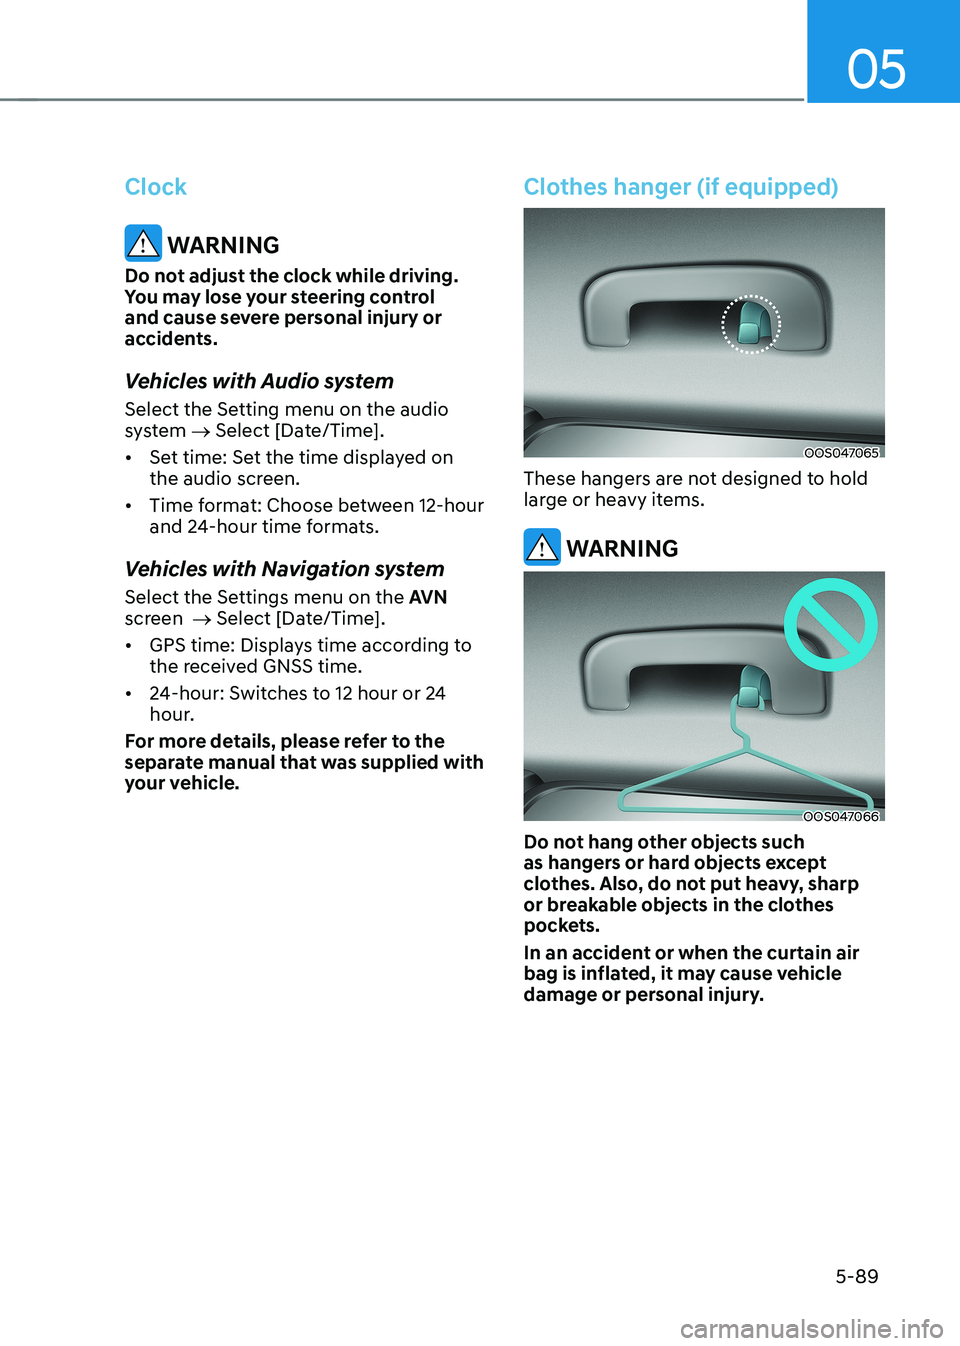 HYUNDAI KONA EV 2023  Owners Manual 05
5-89
Clock
 WARNING
Do not adjust the clock while driving.  
You may lose your steering control 
and cause severe personal injury or 
accidents. 
Vehicles with Audio system 
Select the Setting menu